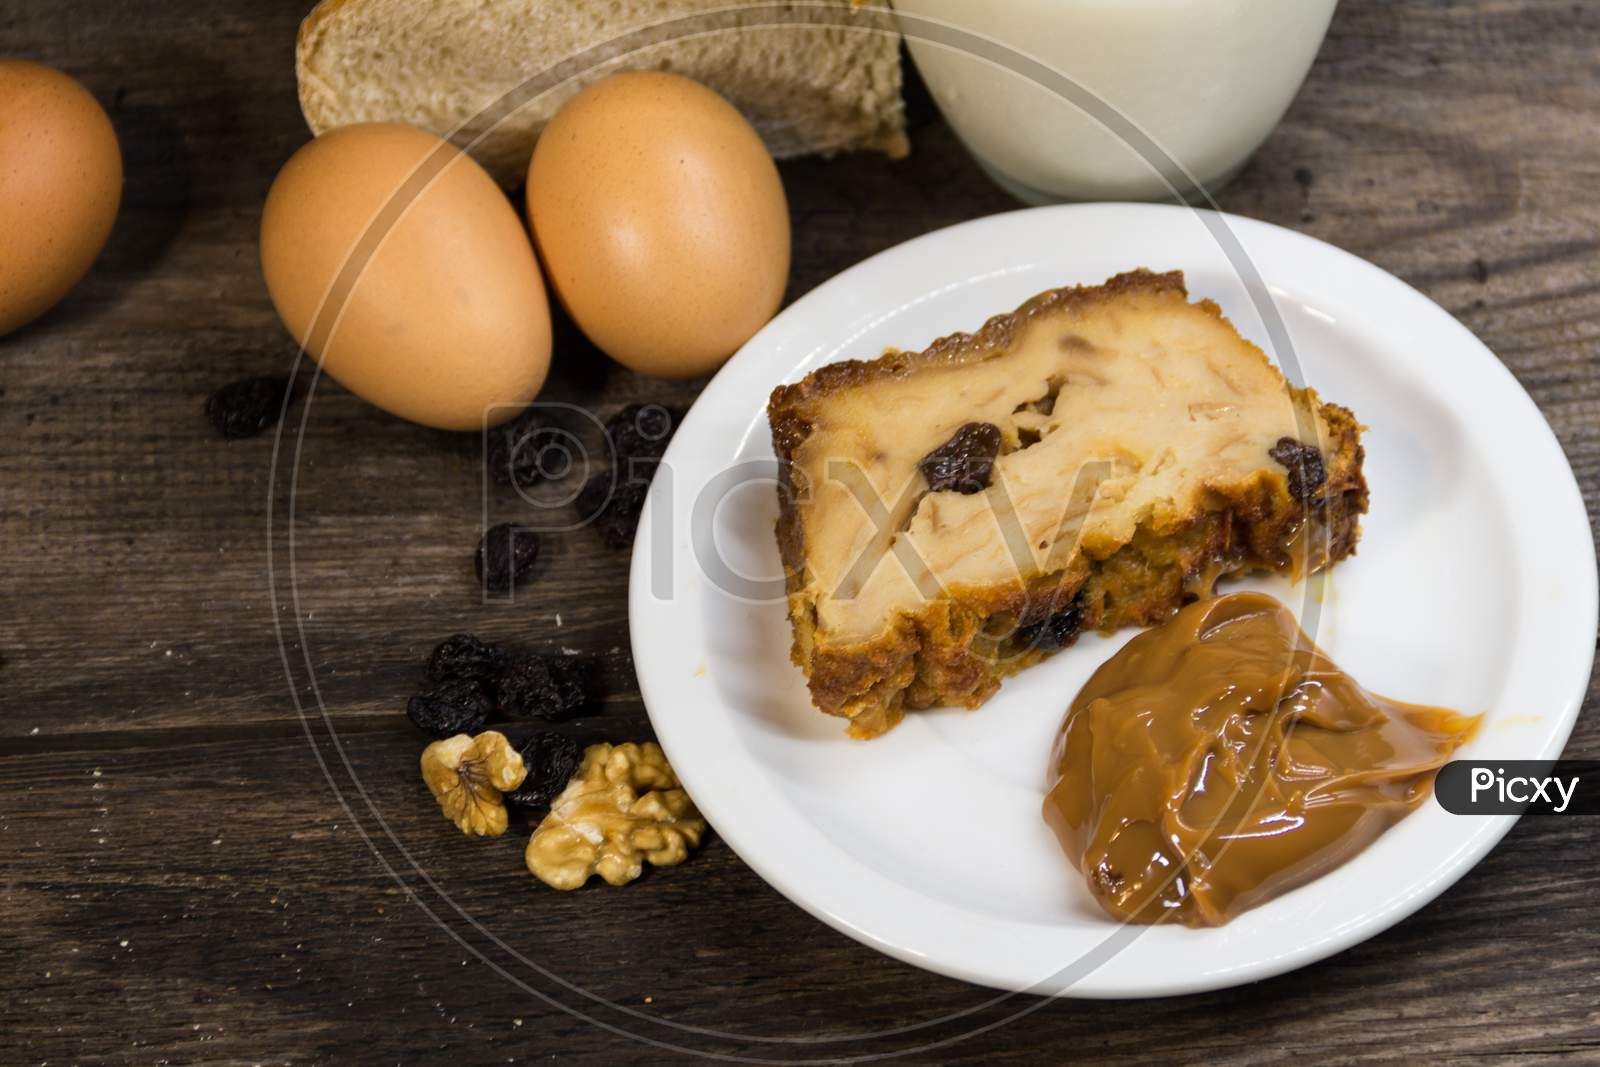 Portion Of Bread Pudding, Made With Milk, Eggs, Stale Bread And Fruits And Dulce De Leche